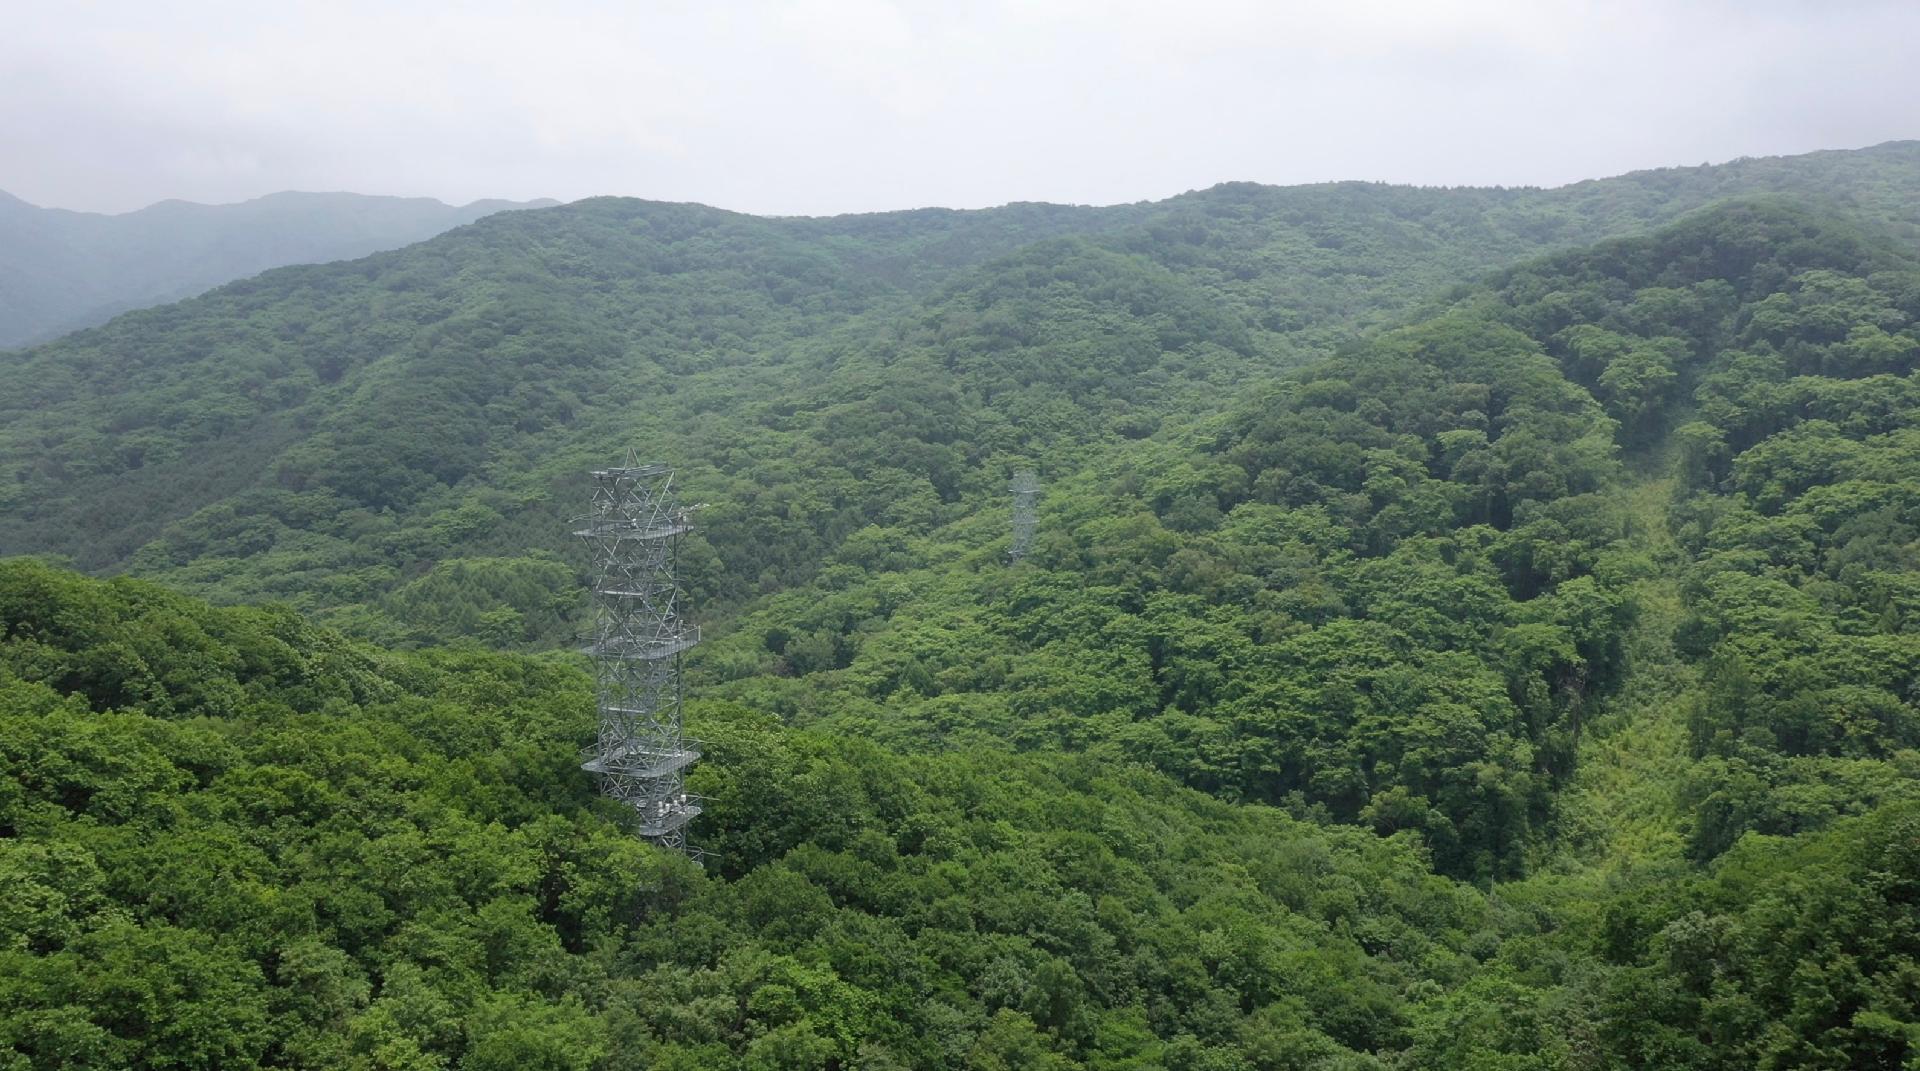 China's Carbon Neutrality: Scientists Make Forest Carbon Data Breakthrough